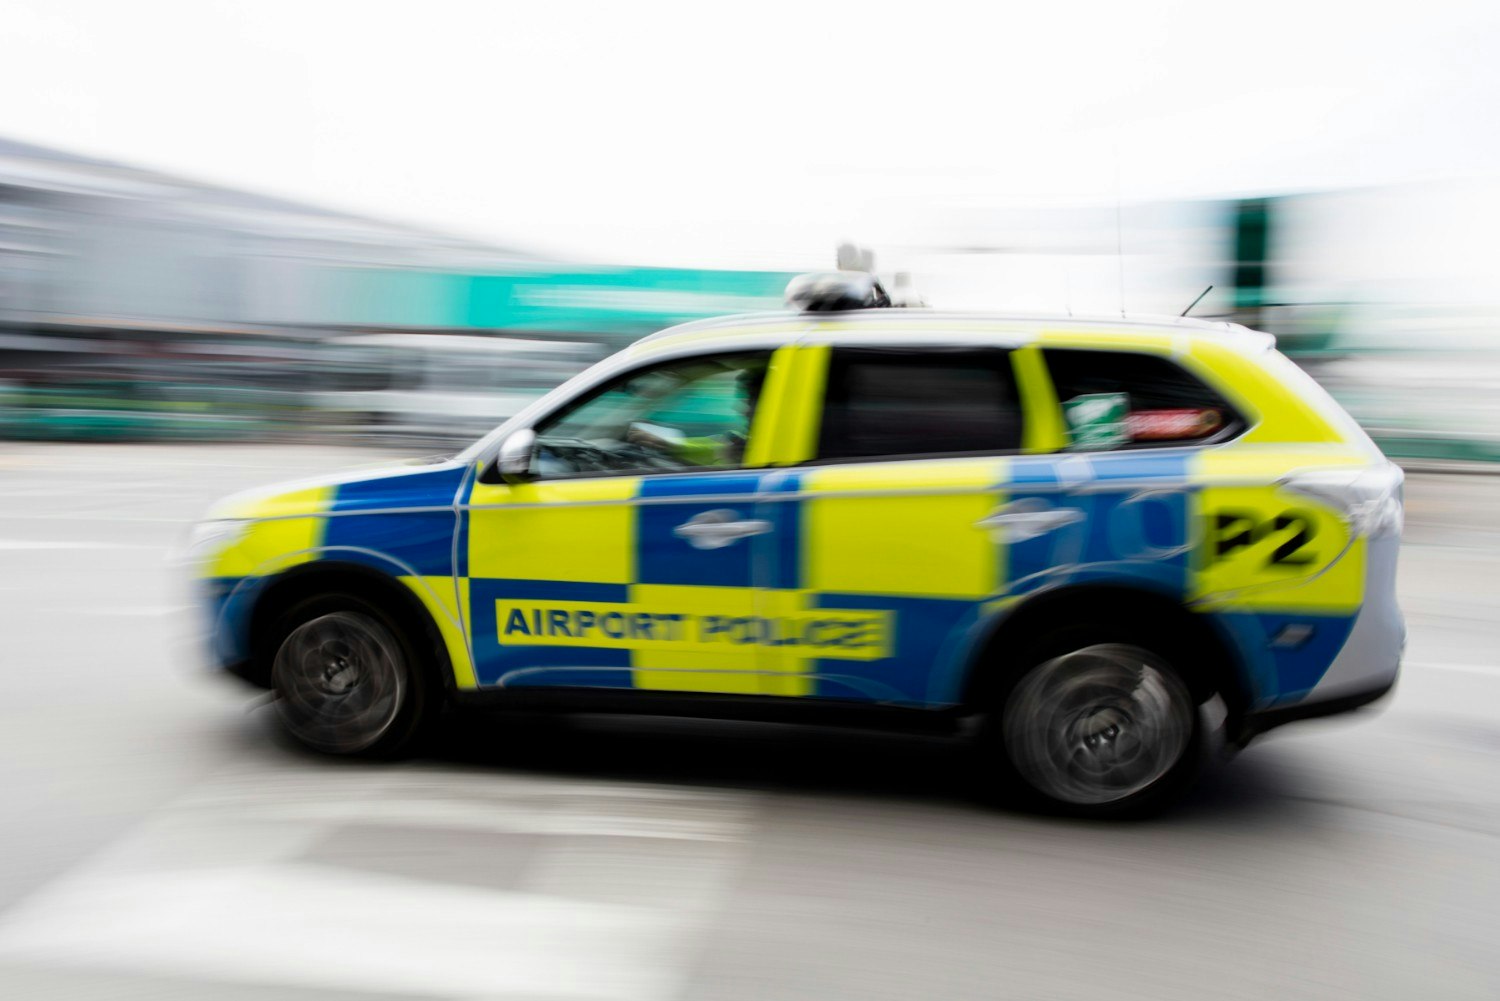 A blurred airport police car